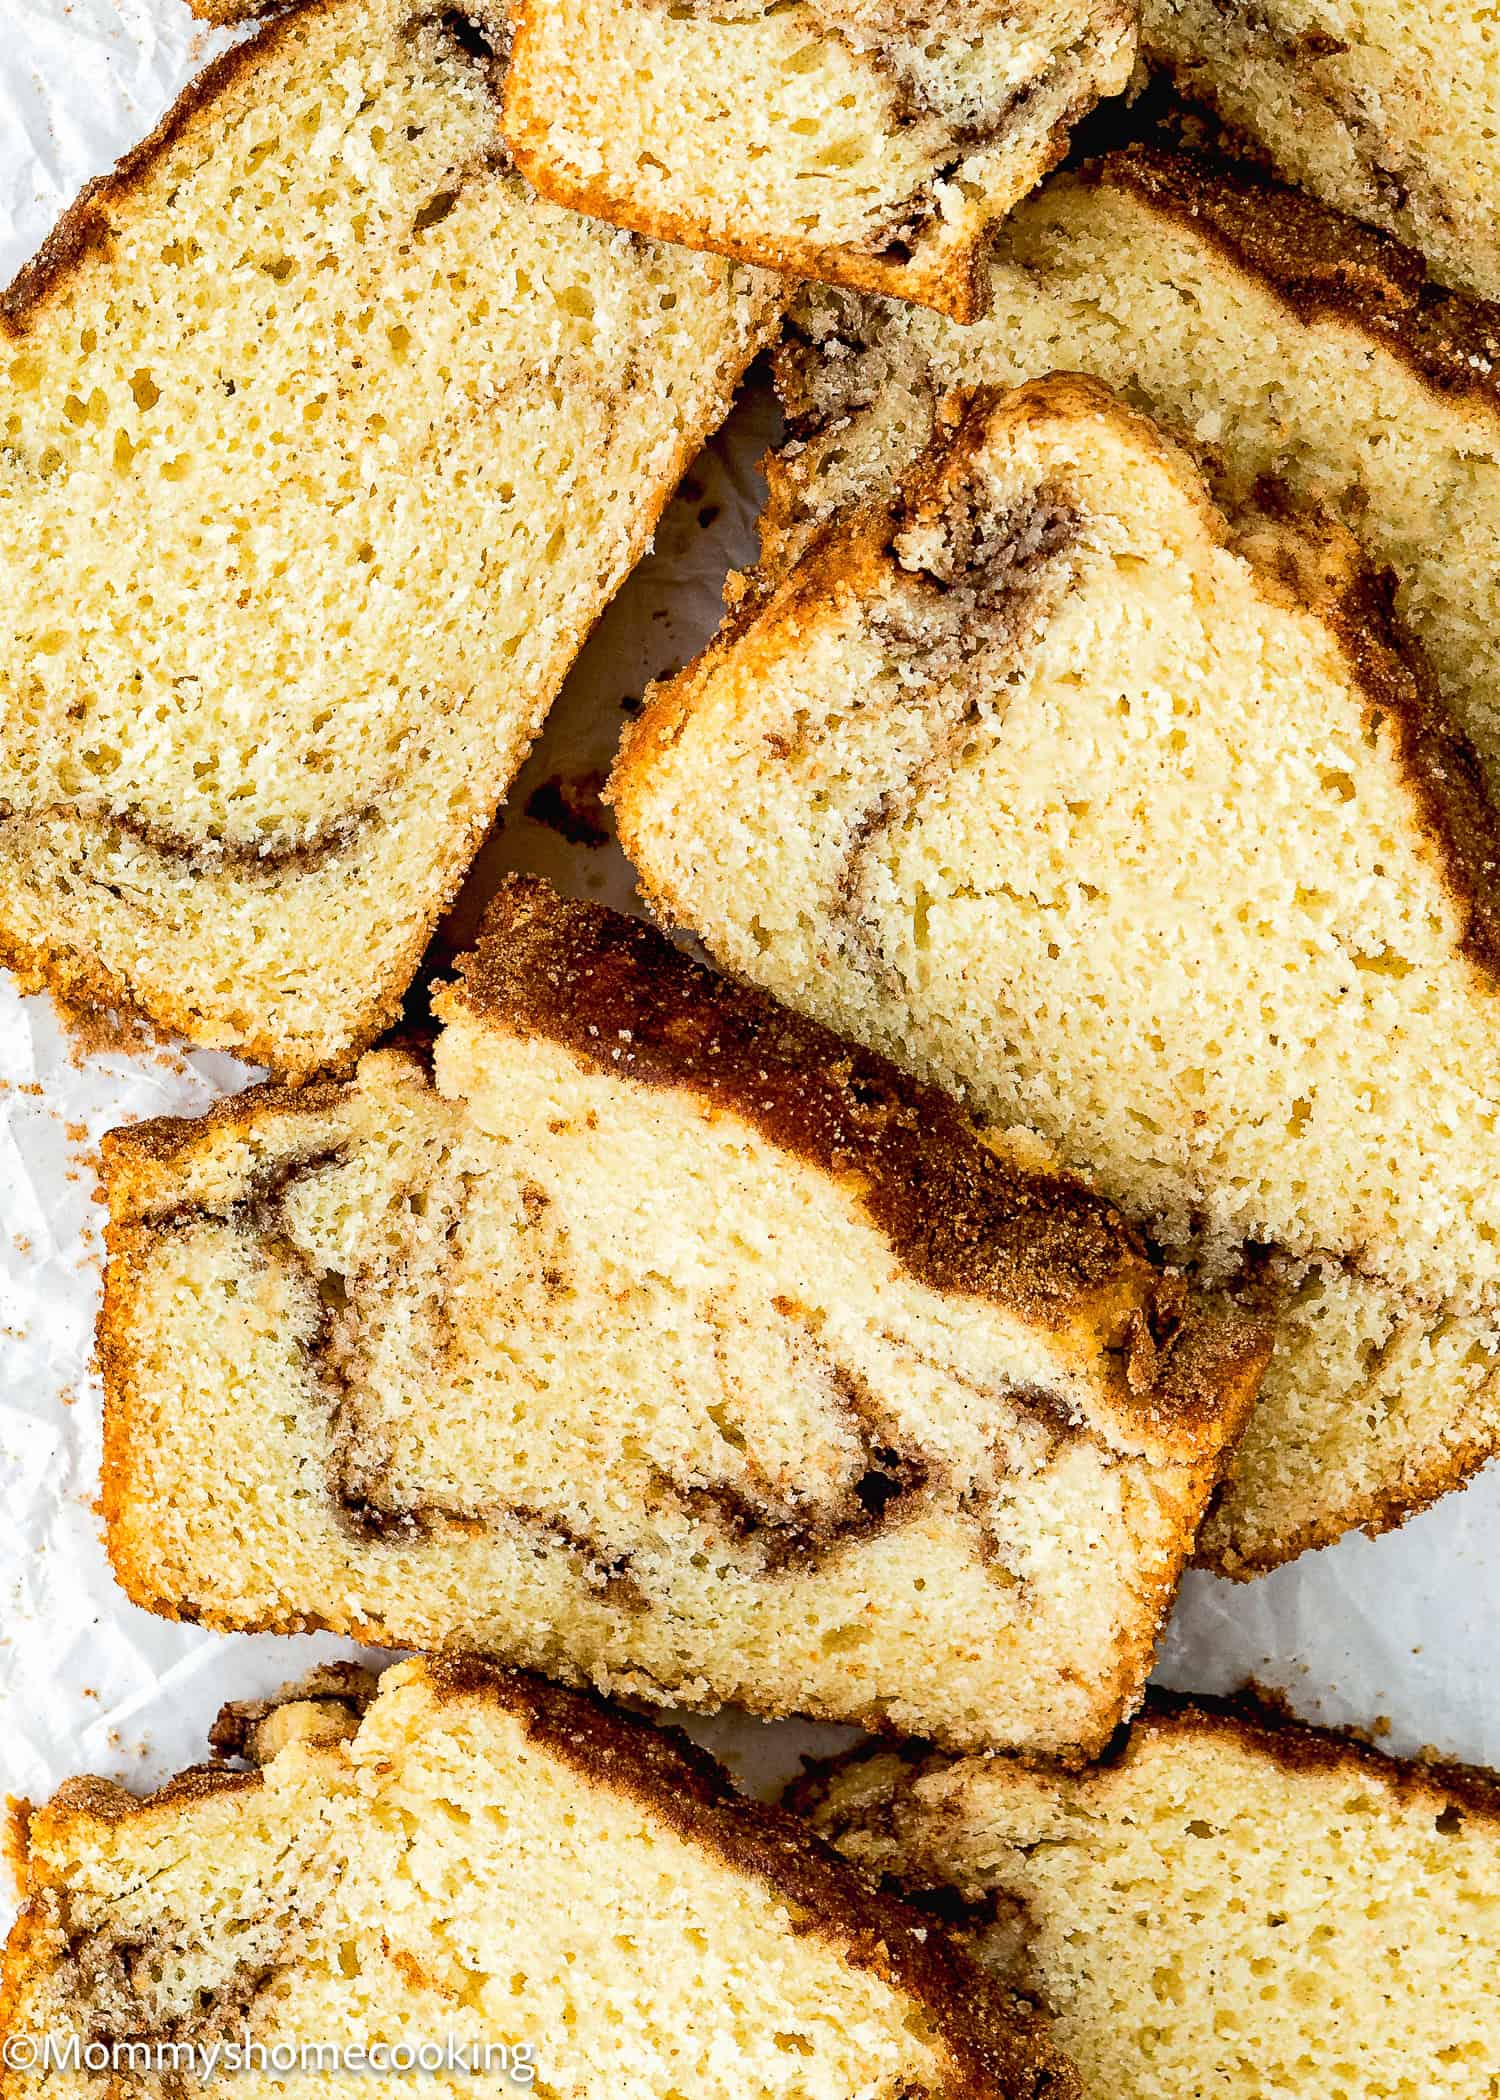 slices of Vegan Cinnamon Swirl Quick Bread sliced showing its perfect inside texture over a white surface.